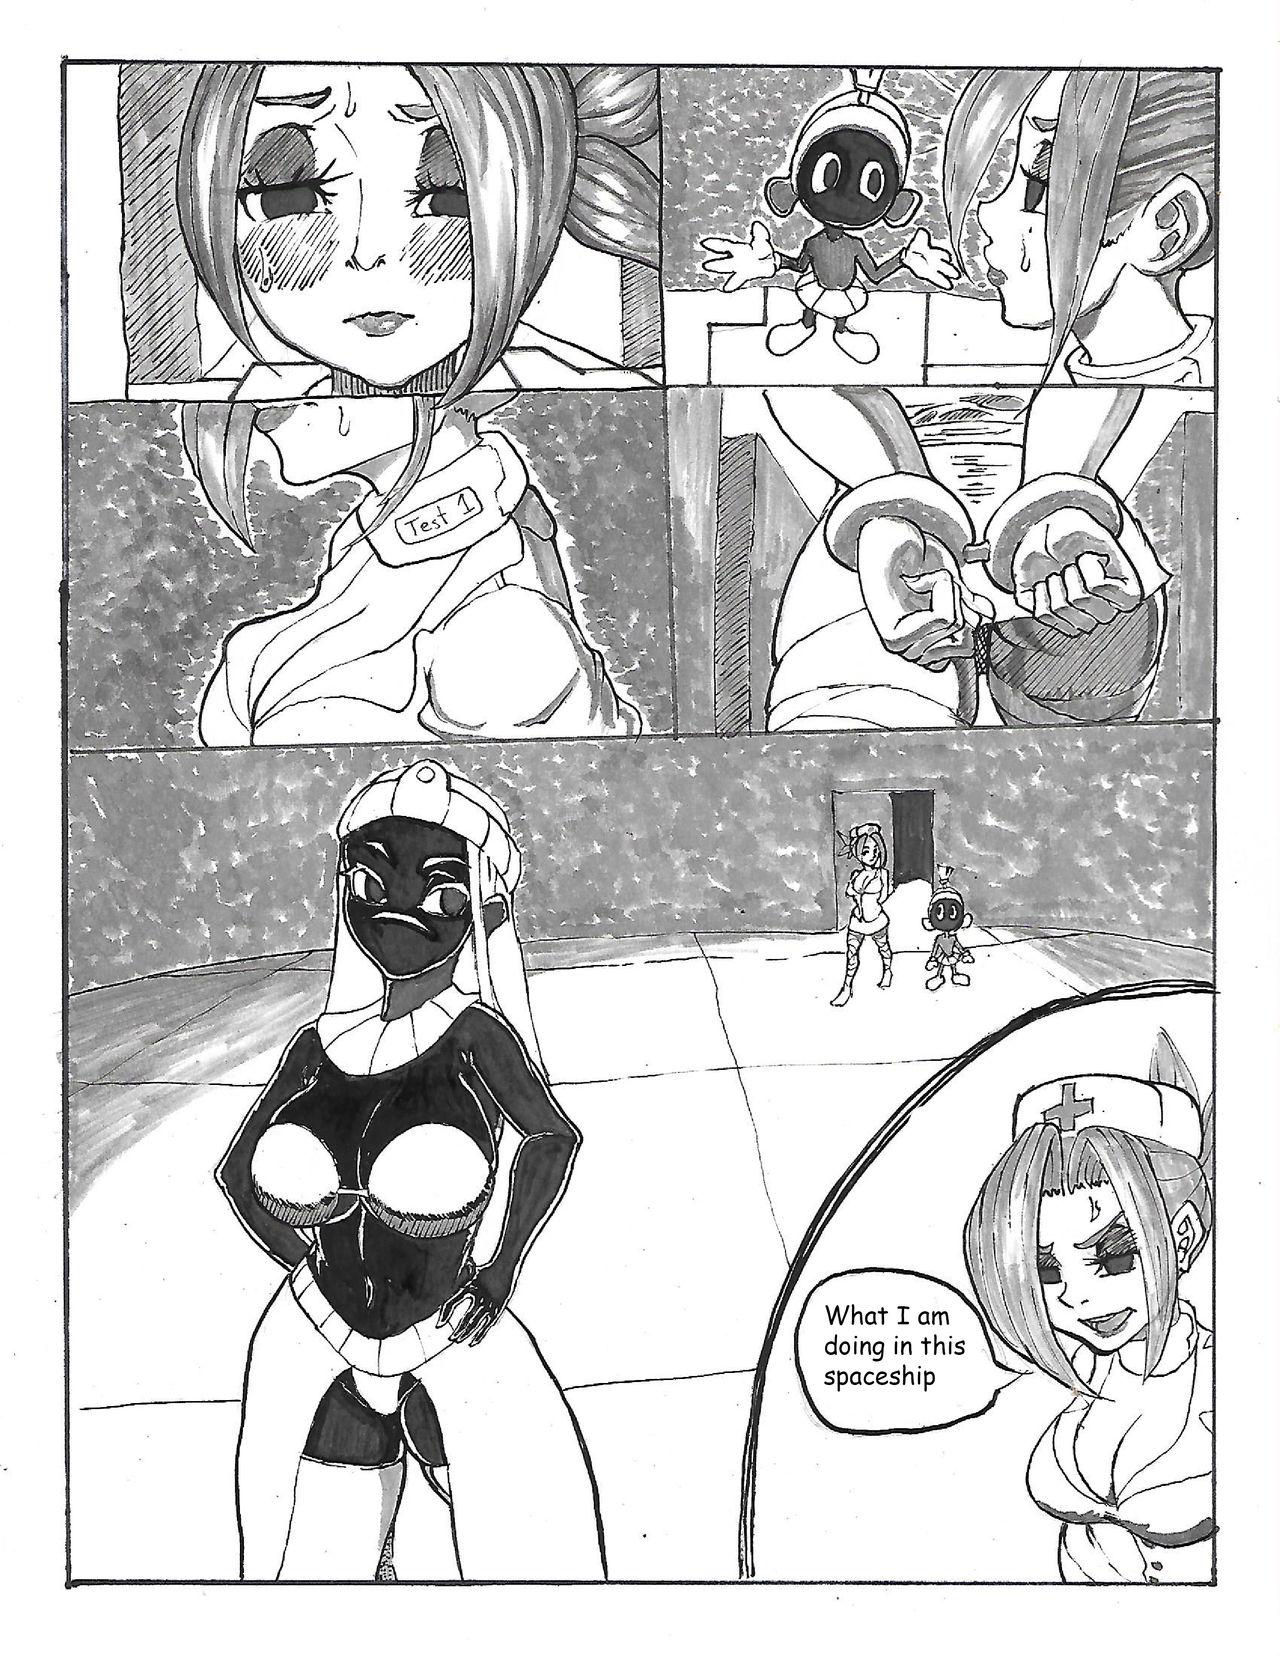 Hot Wife Yuri Quest - Duck dodgers Cum Swallow - Page 2